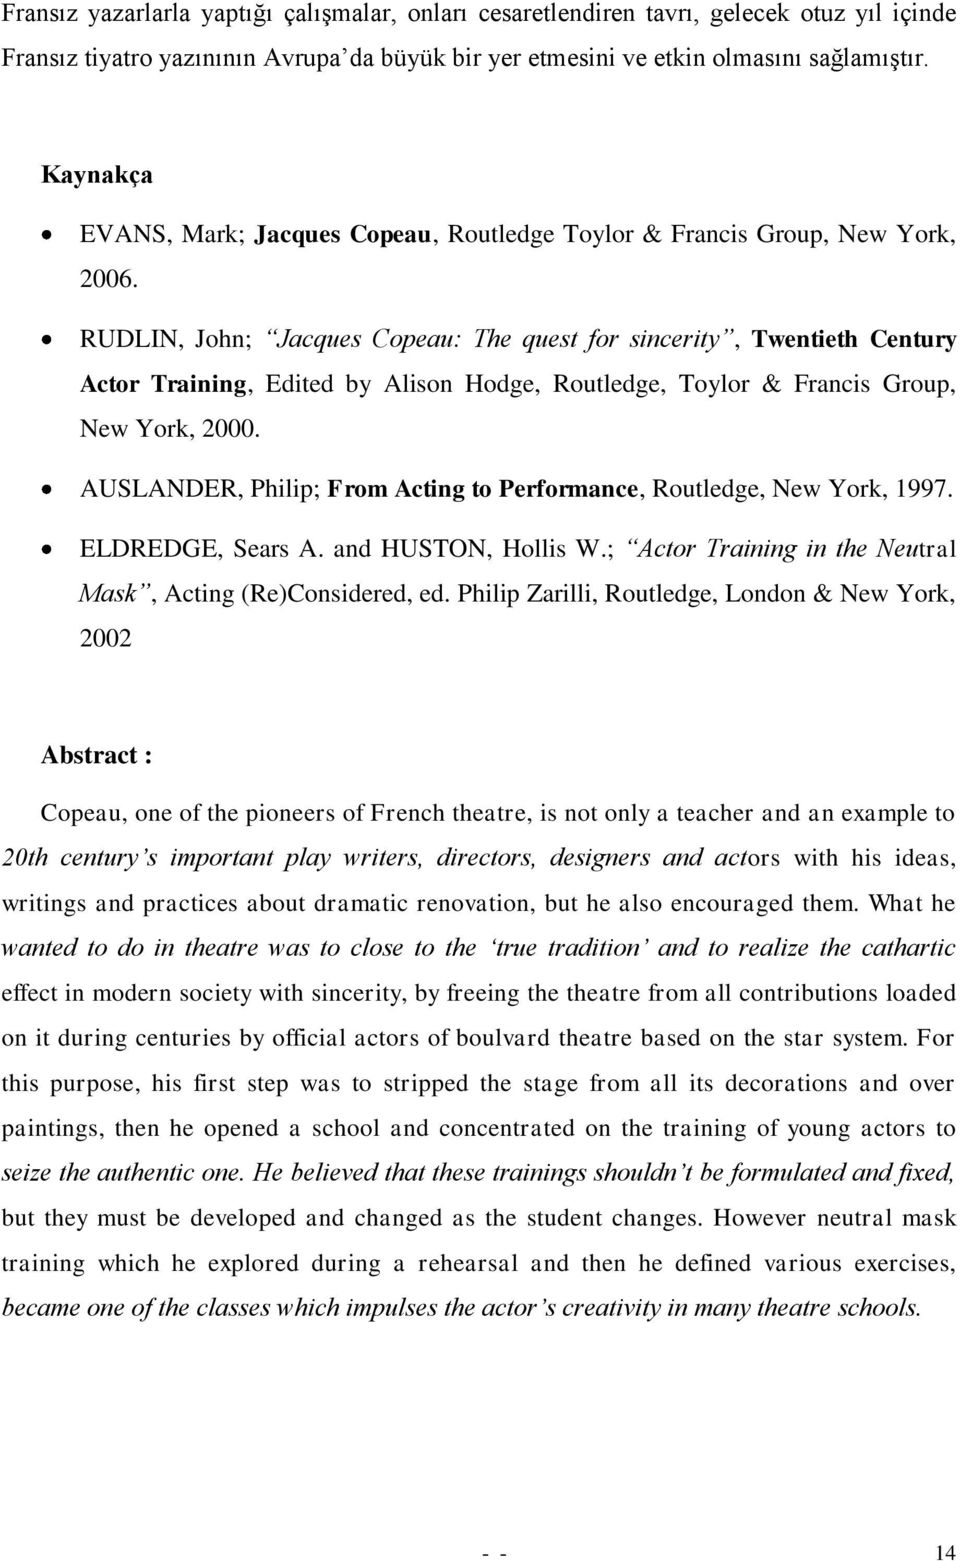 RUDLIN, John; Jacques Copeau: The quest for sincerity, Twentieth Century Actor Training, Edited by Alison Hodge, Routledge, Toylor & Francis Group, New York, 2000.